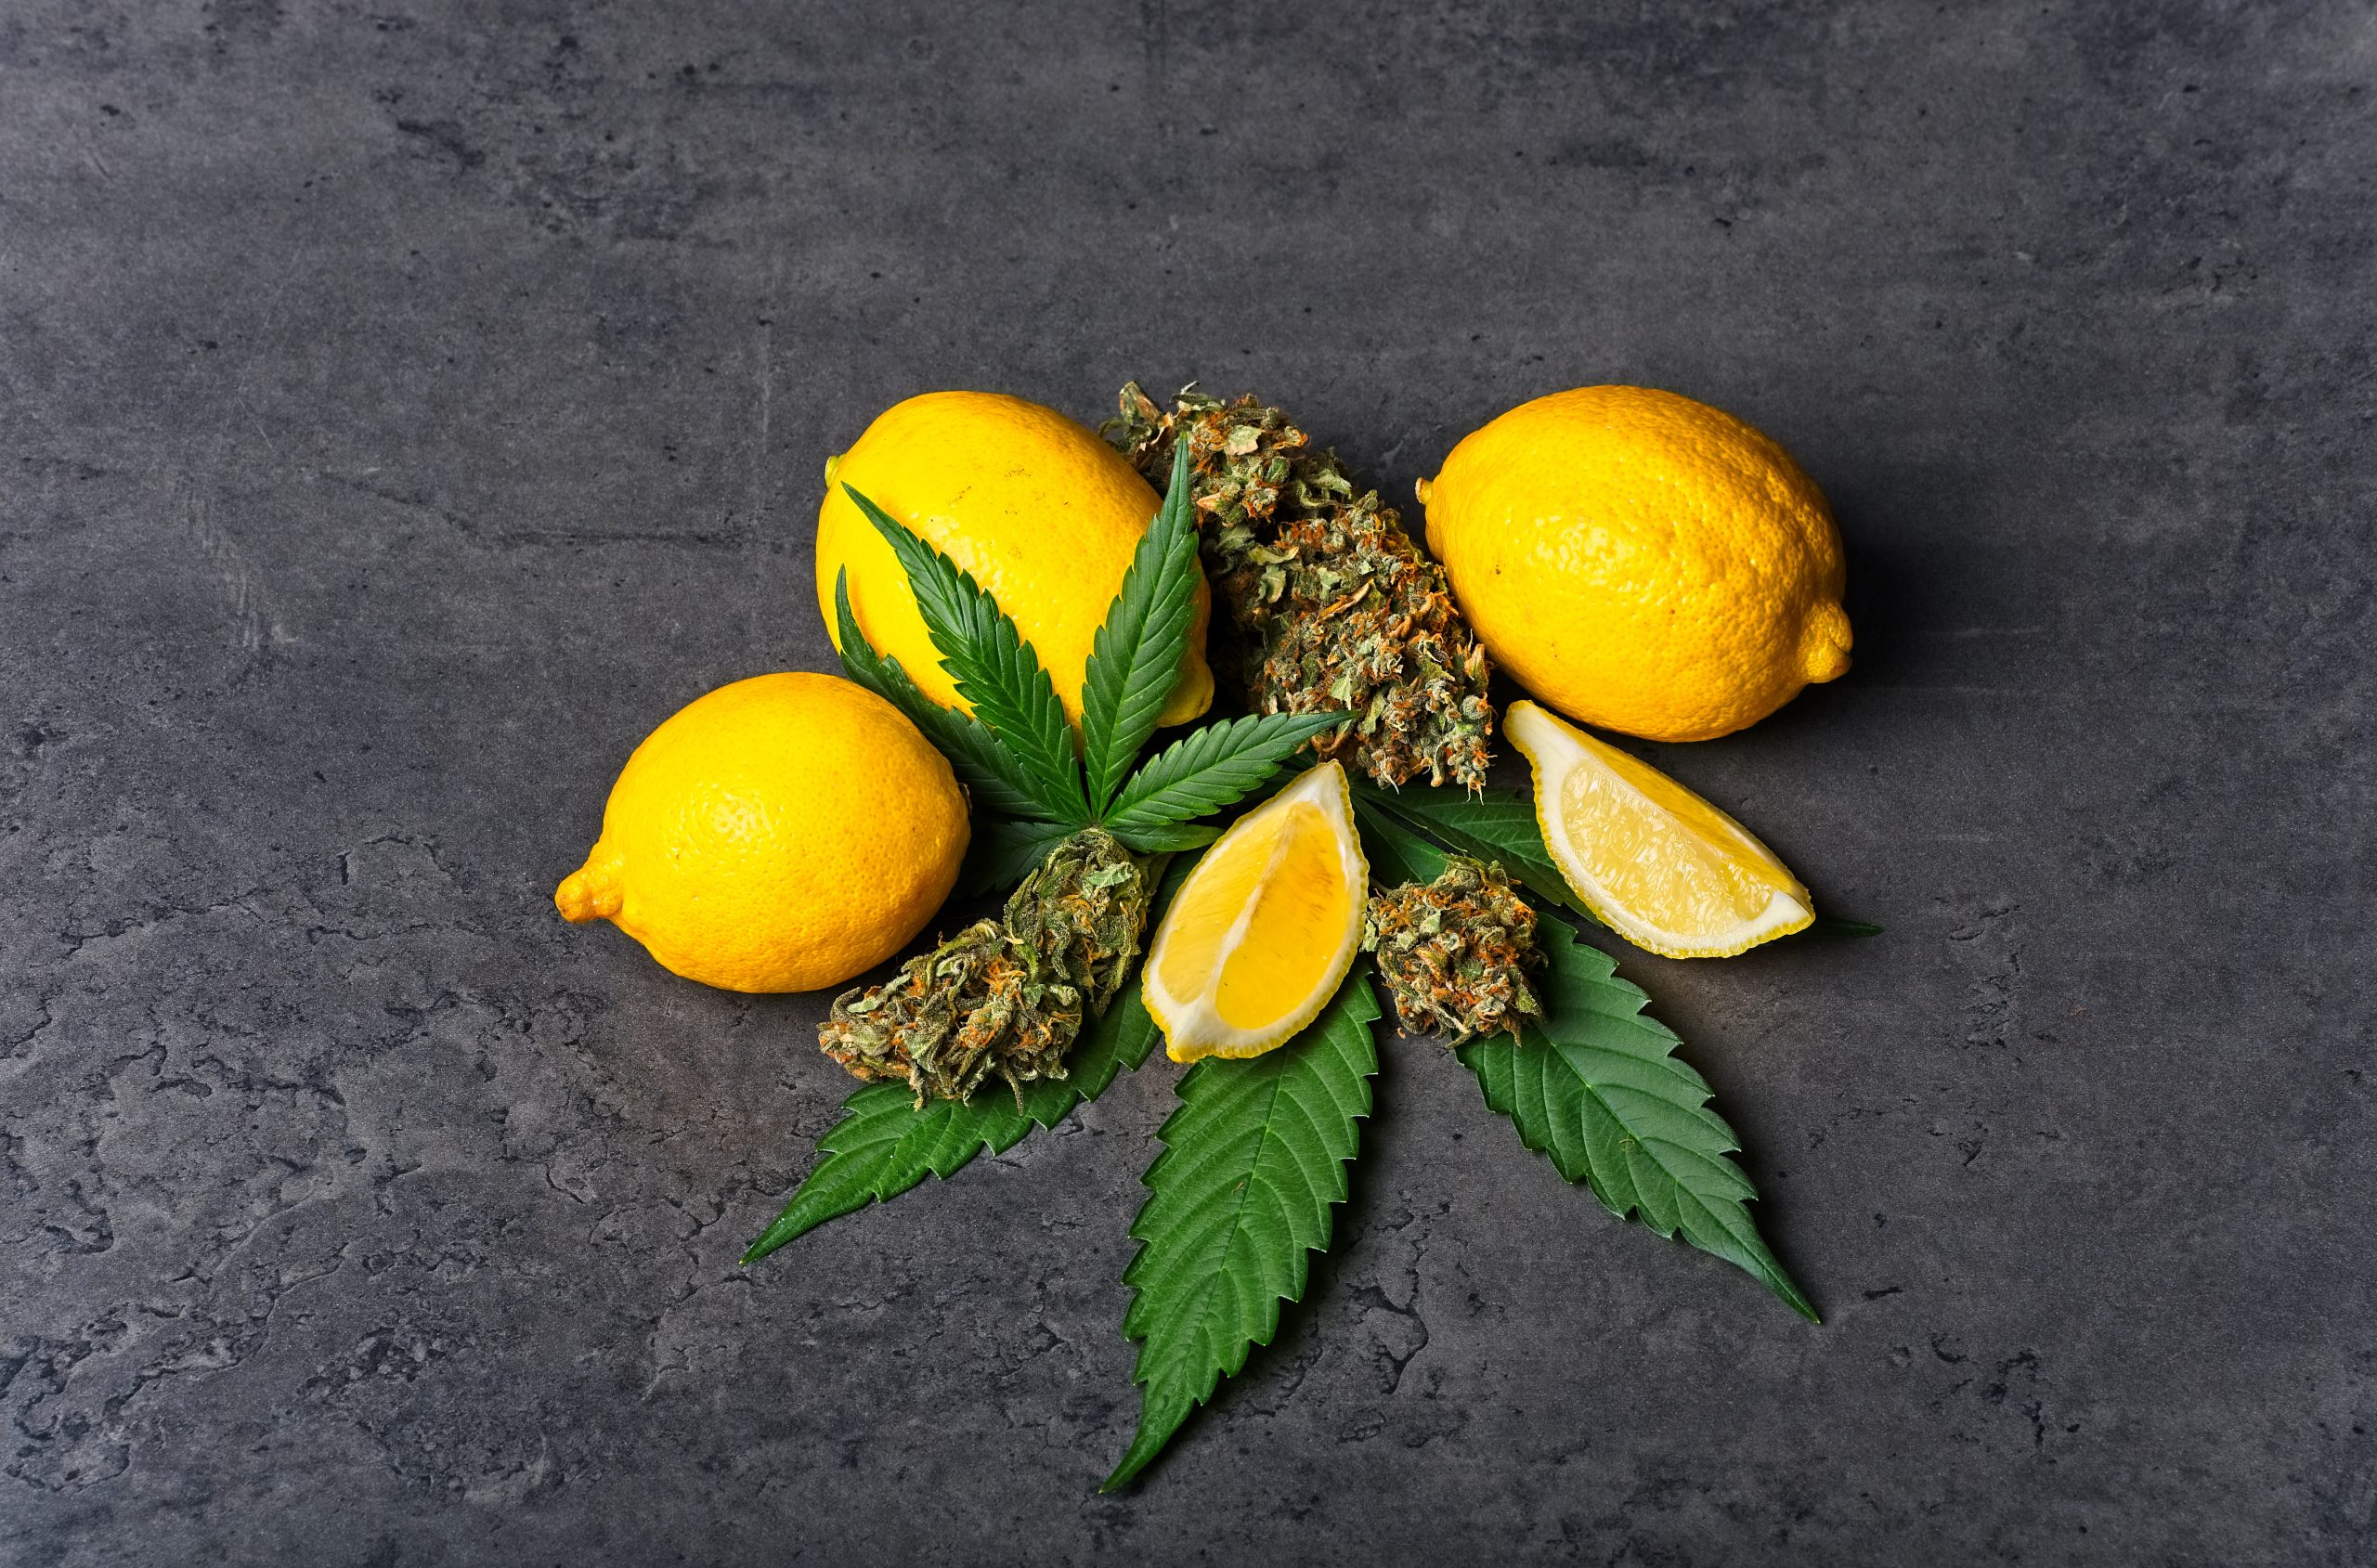 Terpenes are flavor, but they also have health benefits